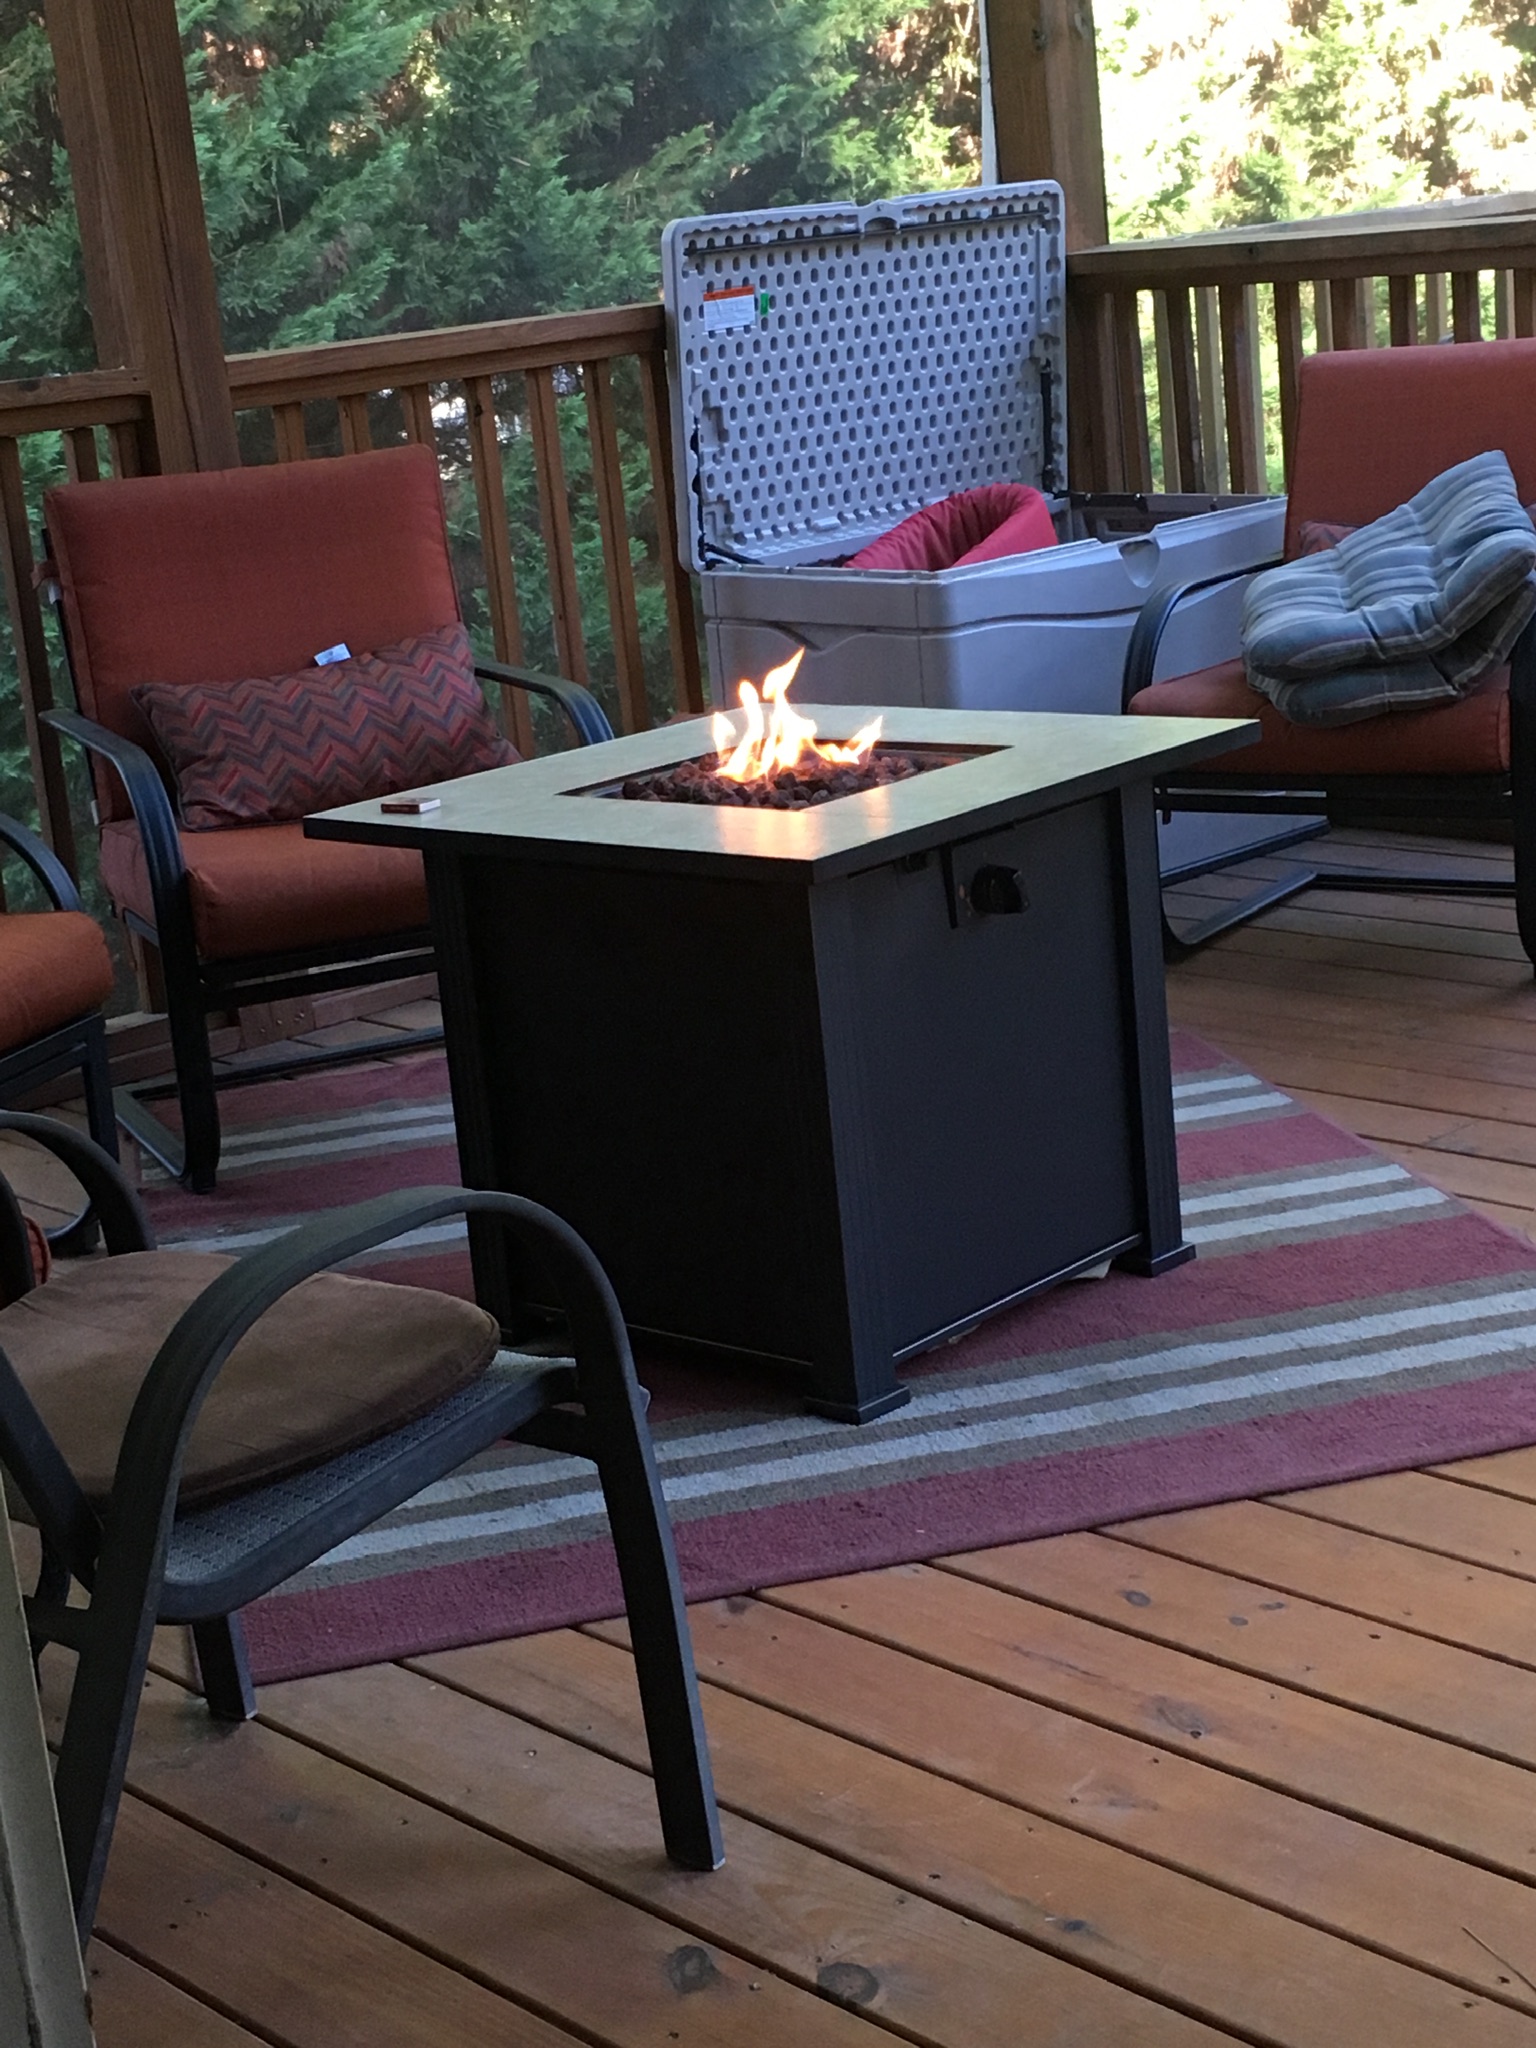 Propane Fire Pit In Screened Porch, Are Propane Fire Pits Safe On Covered Decks